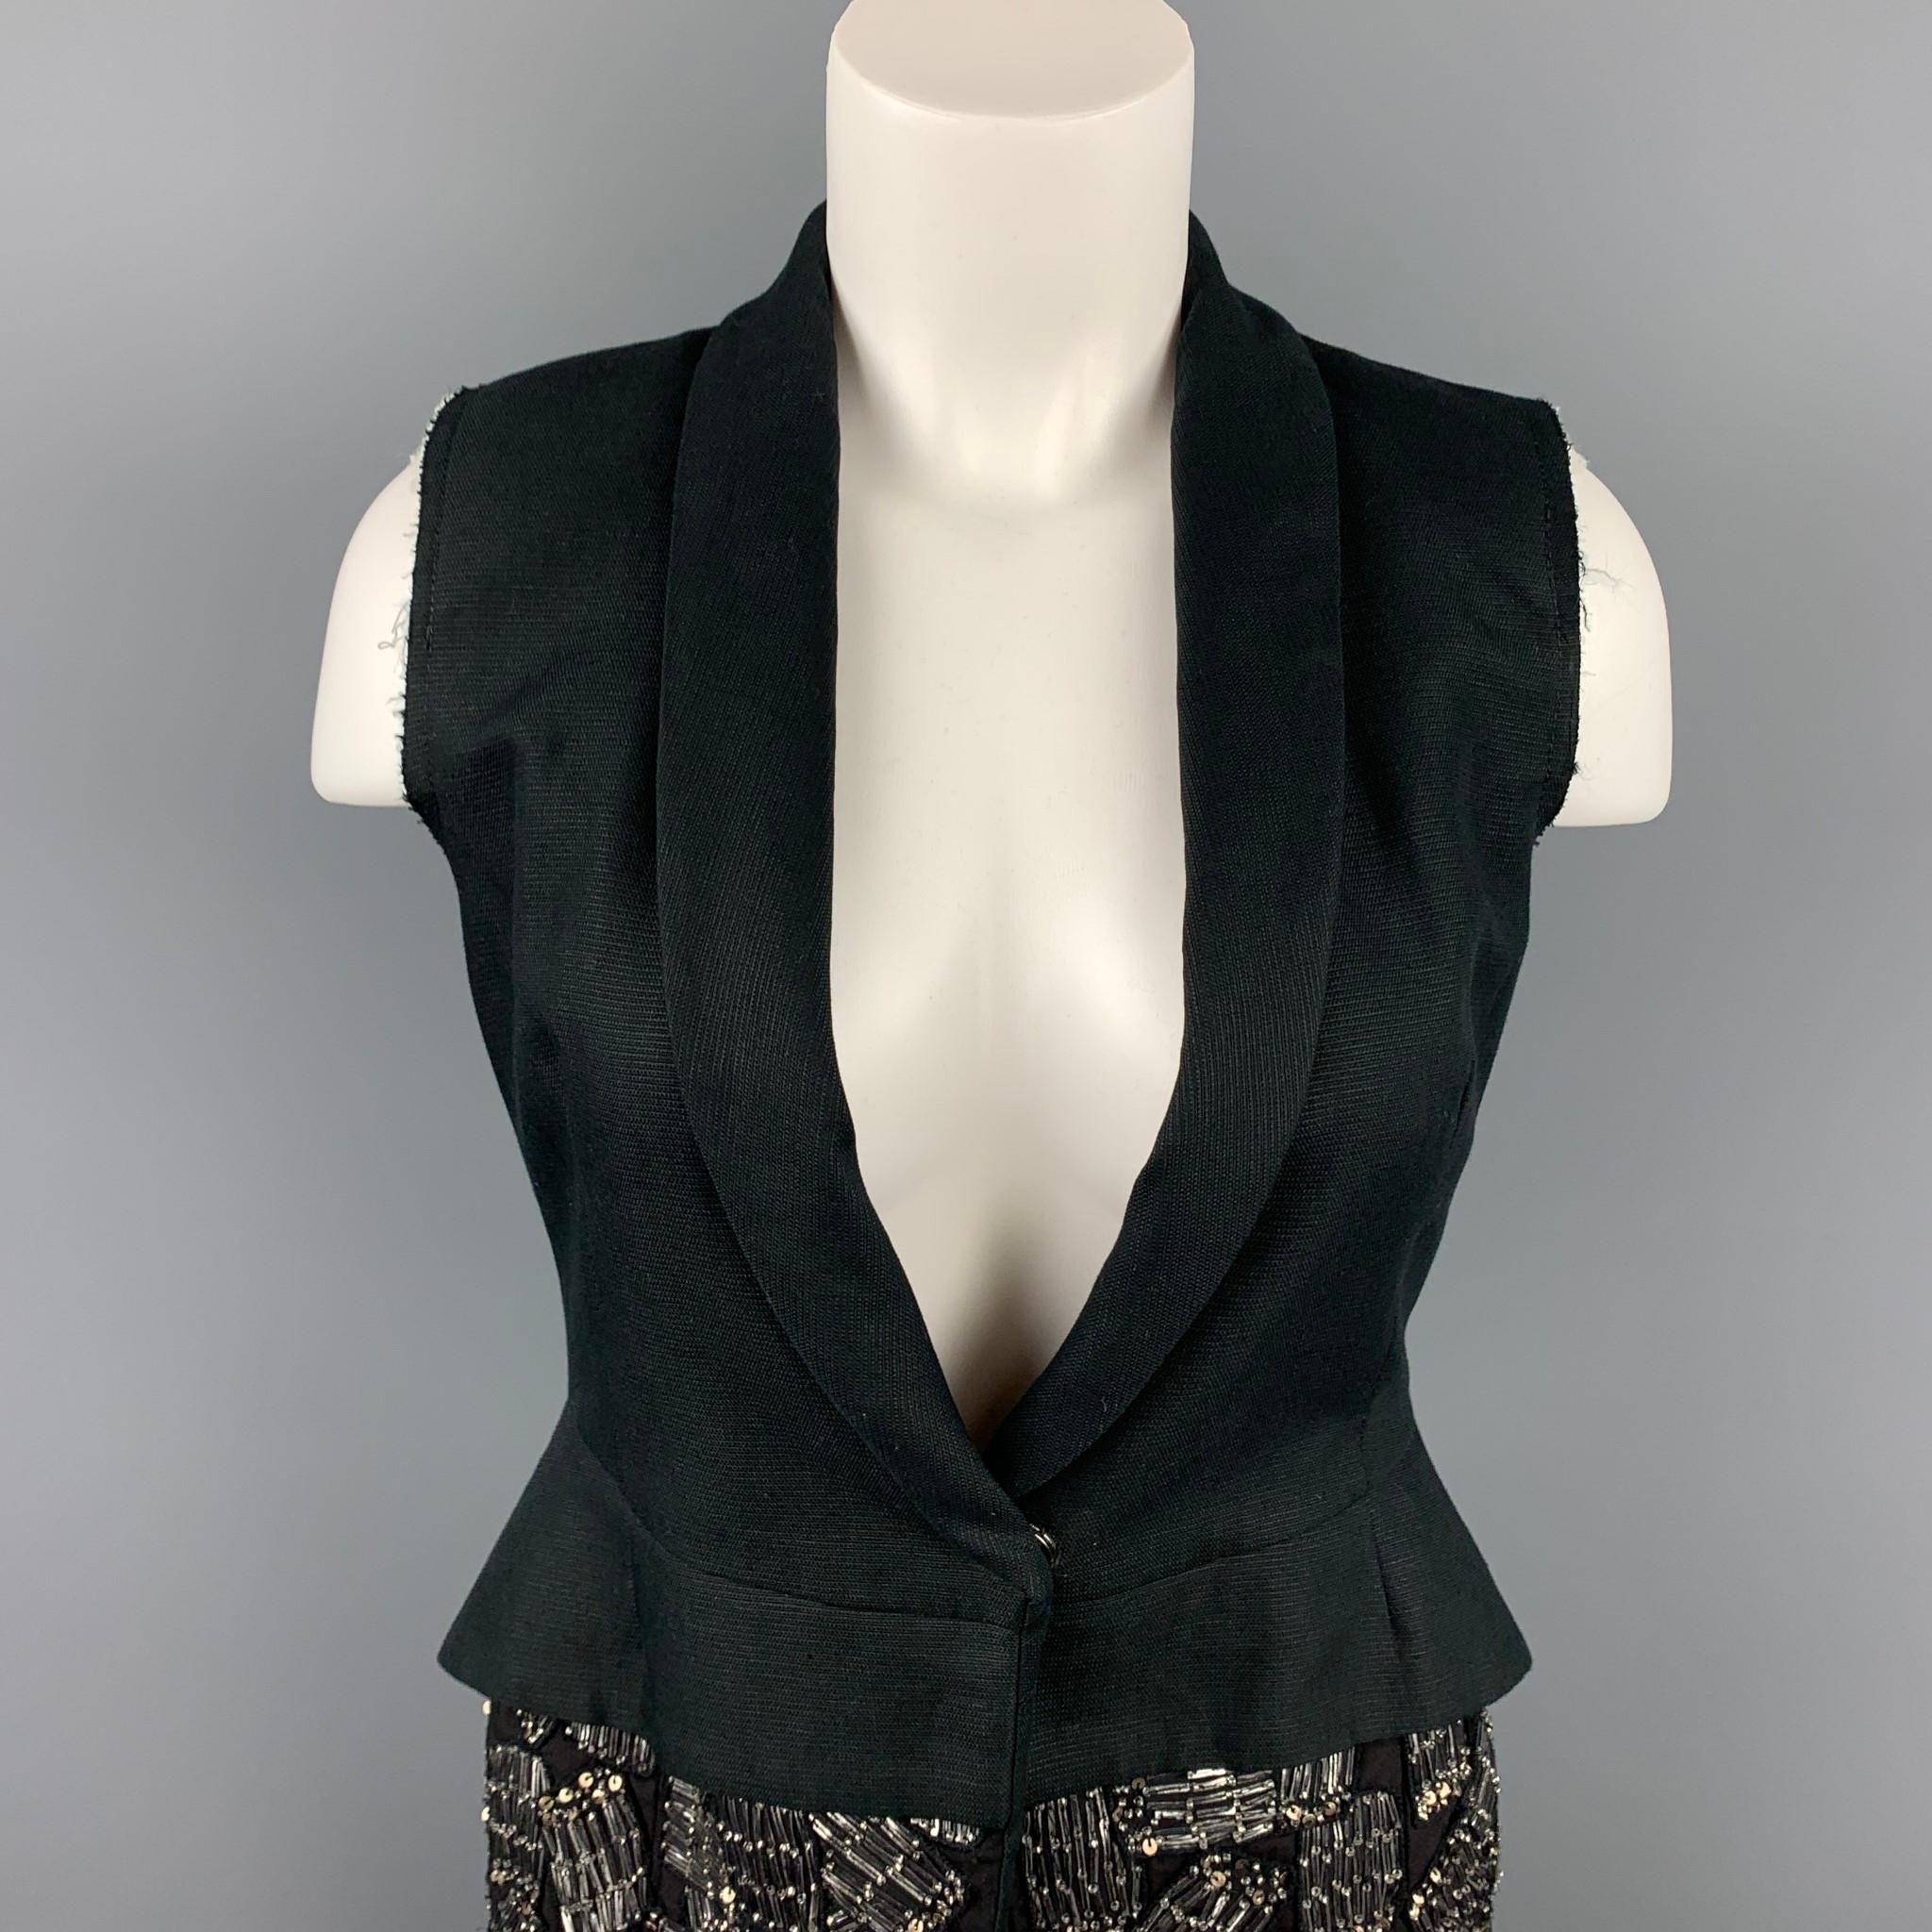 DRIES VAN NOTEN vest comes in a black cotton / linen with a beaded trim design featuring a full liner, shawl collar, and a single snap button closure. 

Very Good Pre-Owned Condition.
Marked: 36

Measurements:

Shoulder: 13 in.
Bust: 32 in.
Length: